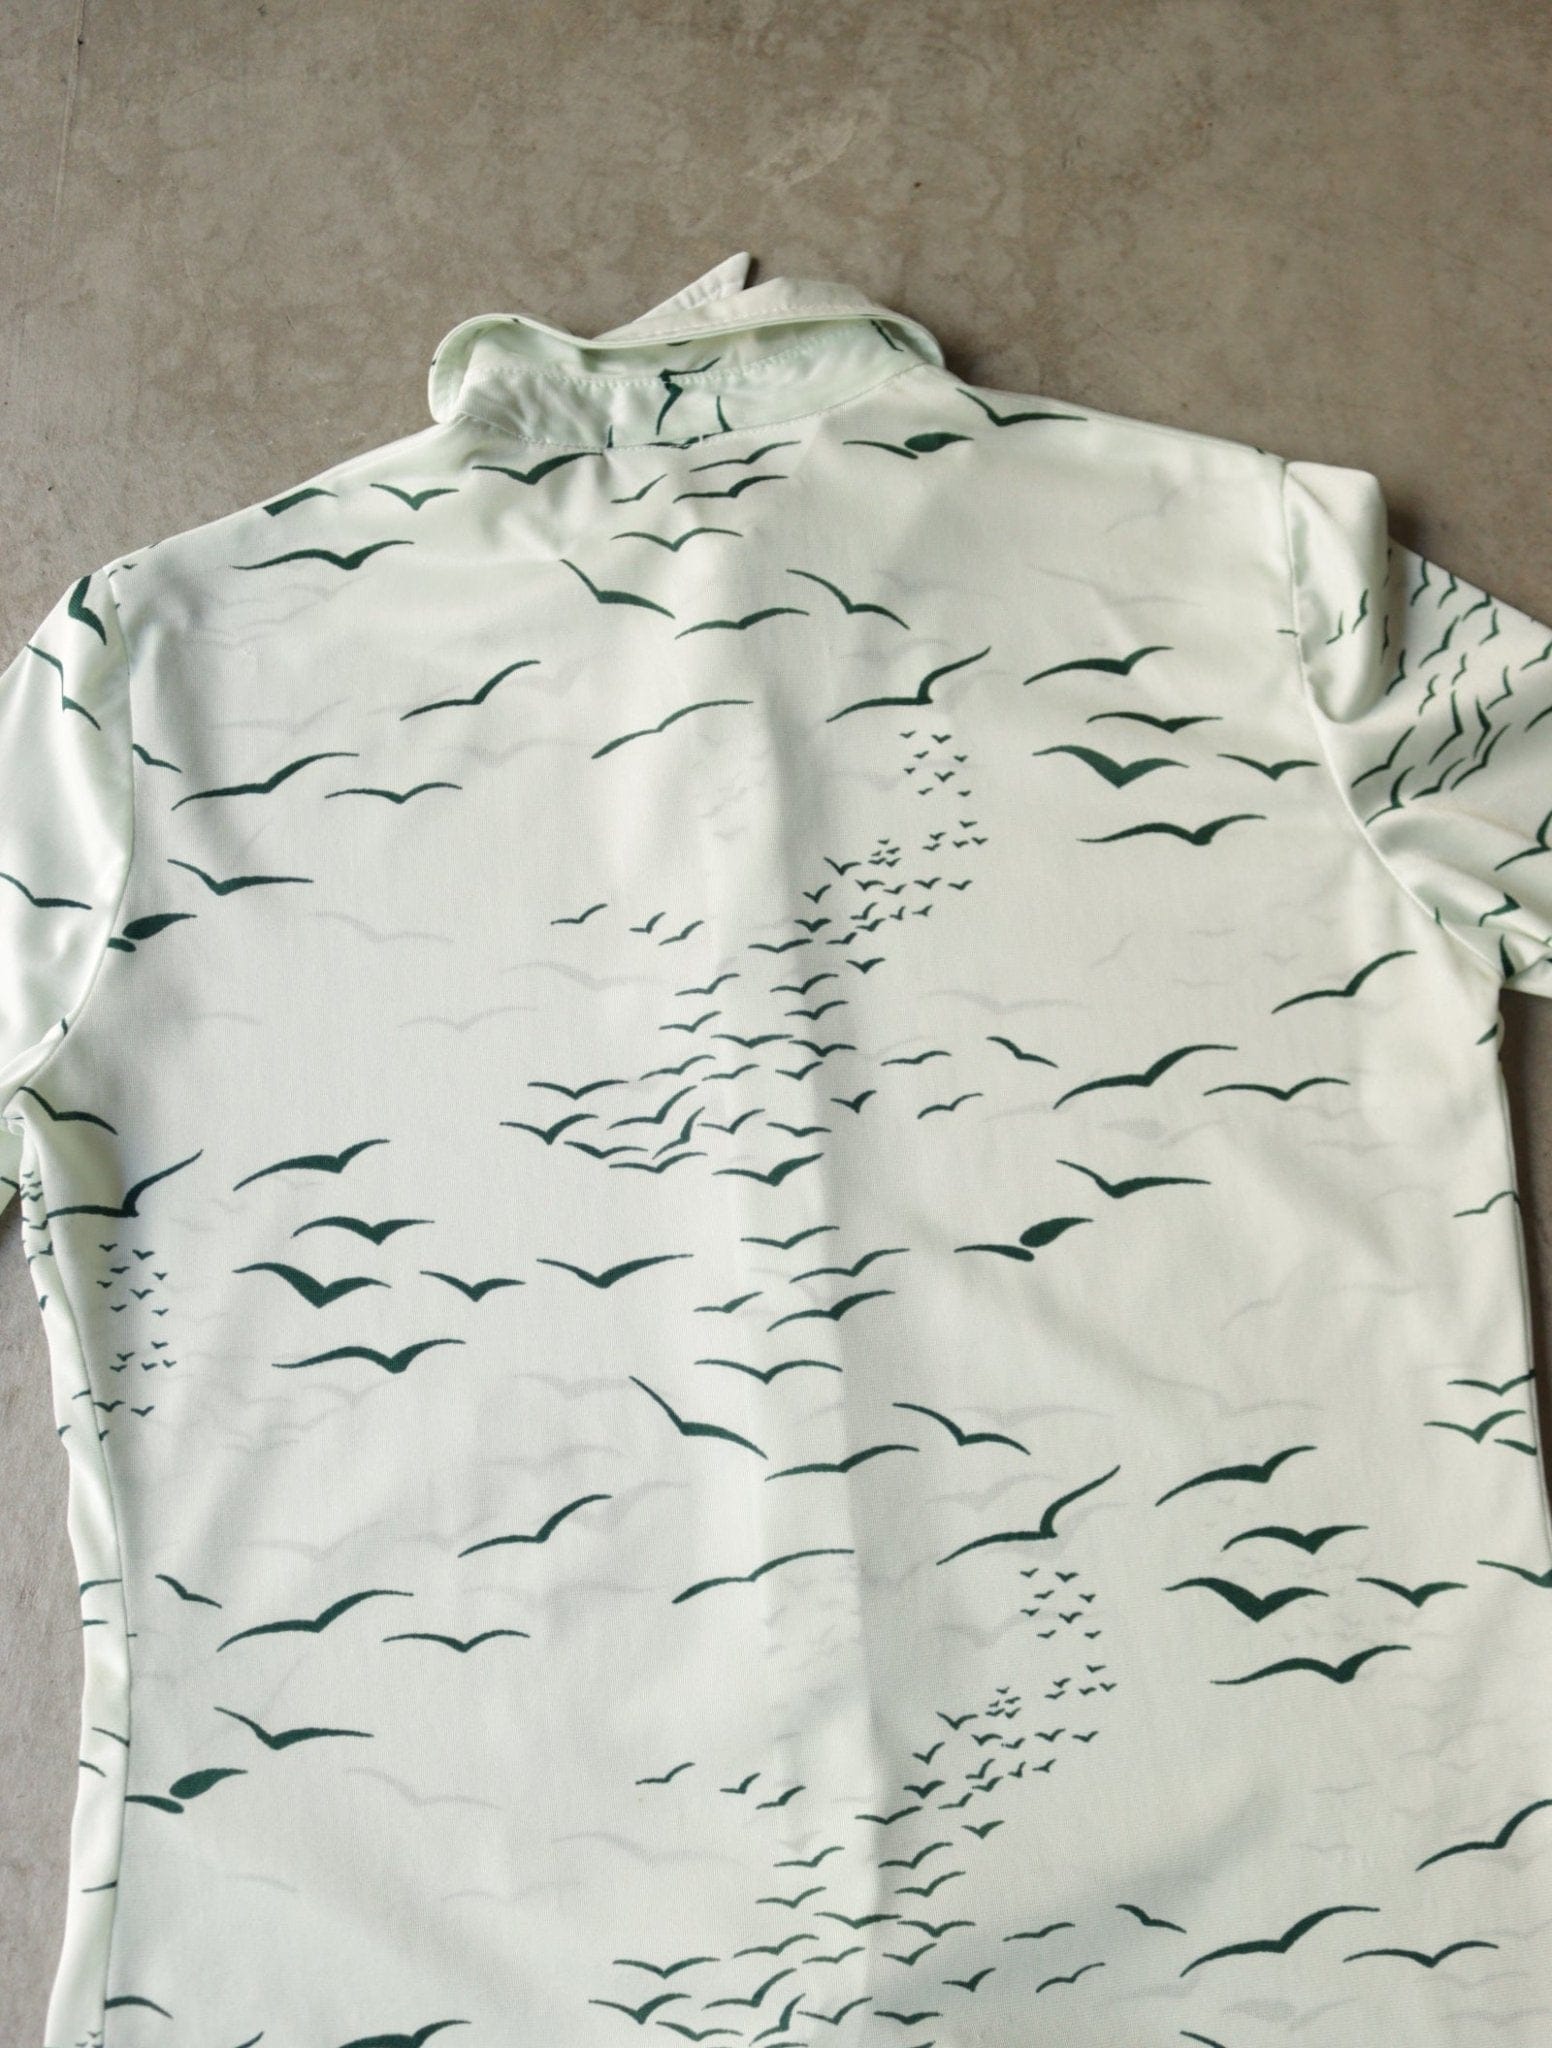 1970S SEAGULLS GREEN GRAPHIC SHIRT - TWO FOLD